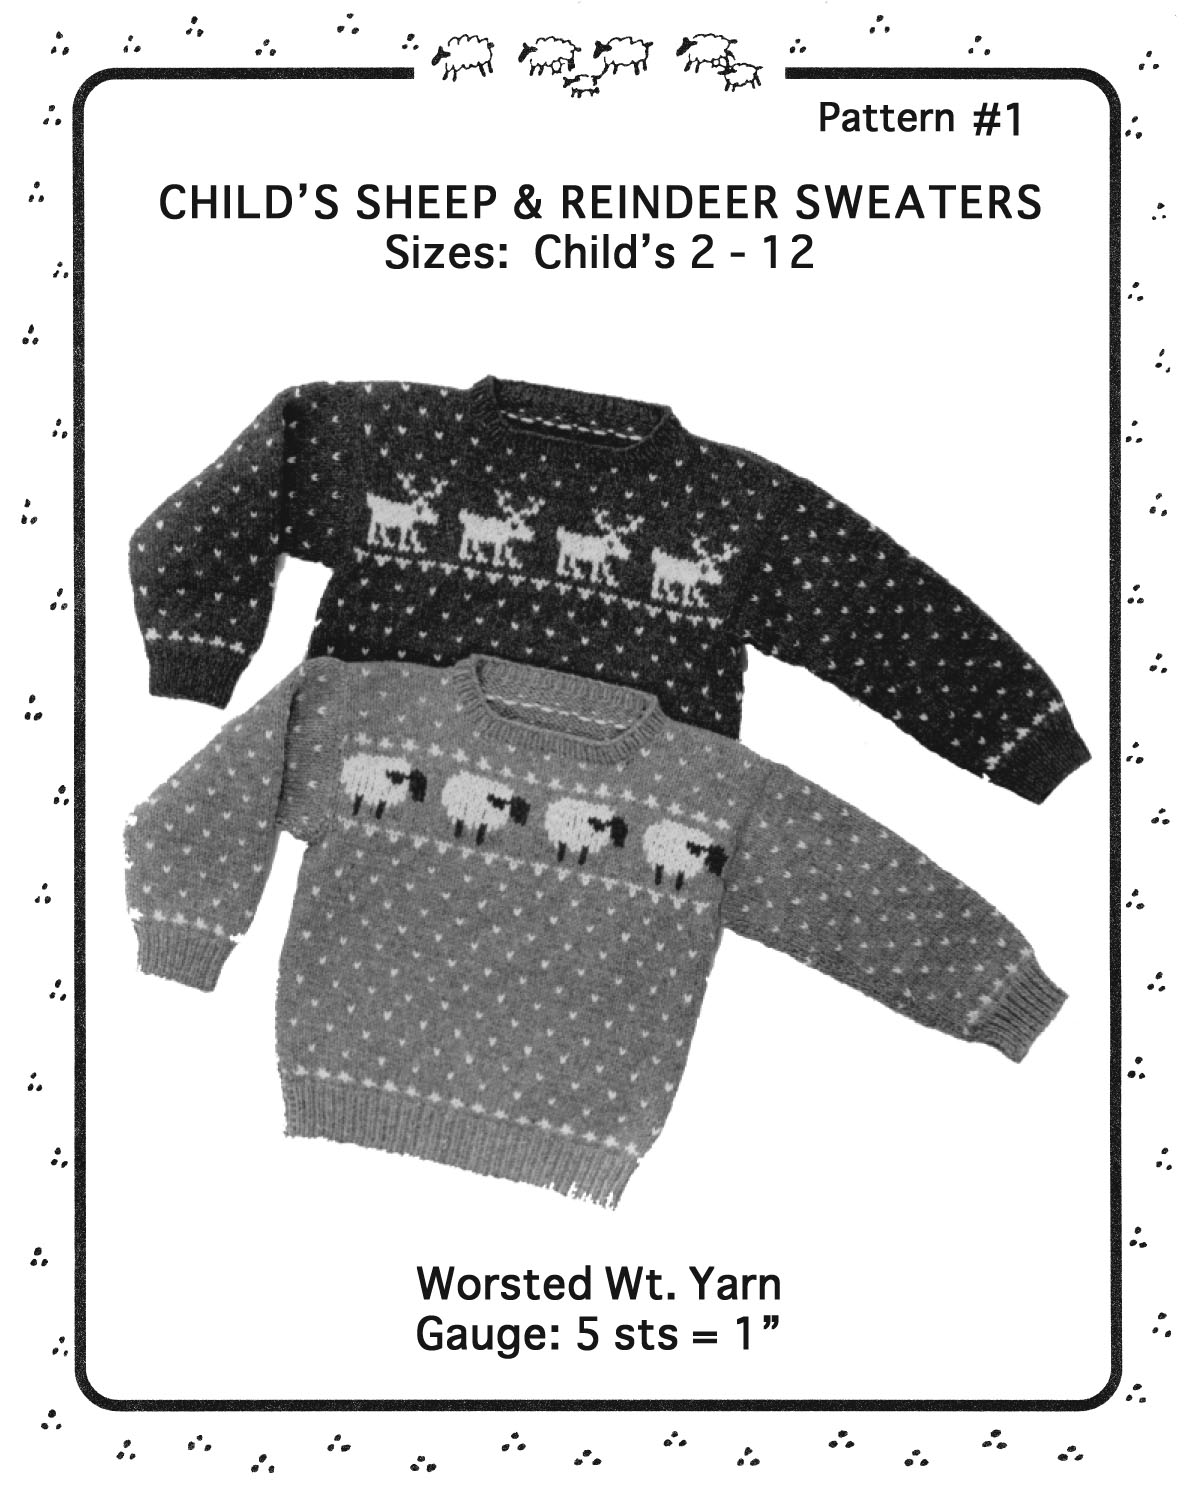 Yankee Knitters Childs Sheep & Reindeer Sweaters - Childs 2-12